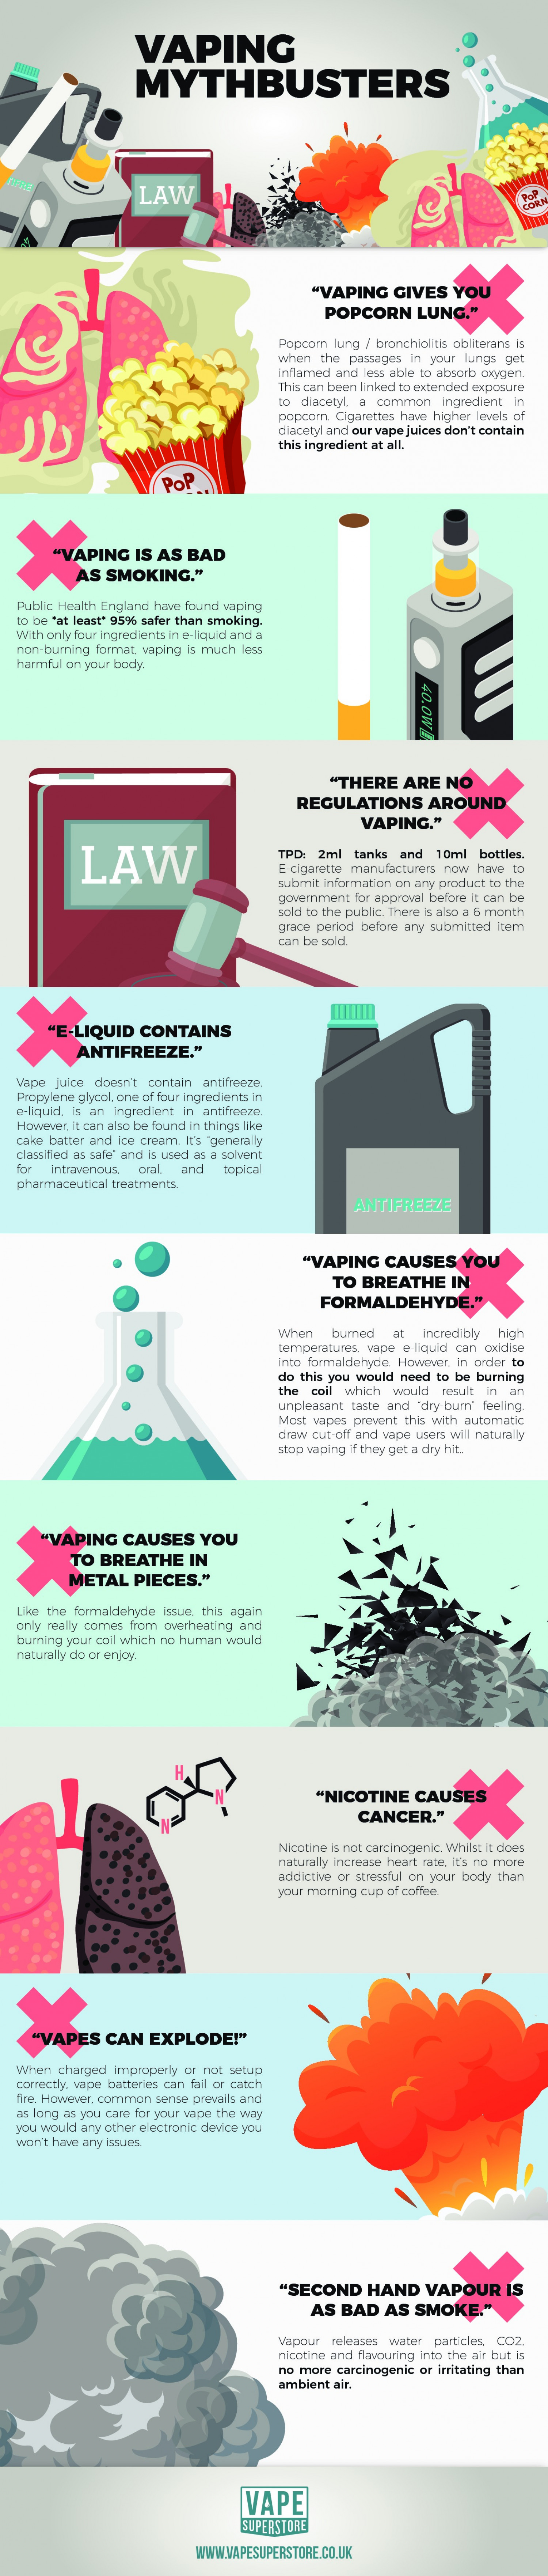 Vaping Mythbusters Infographic